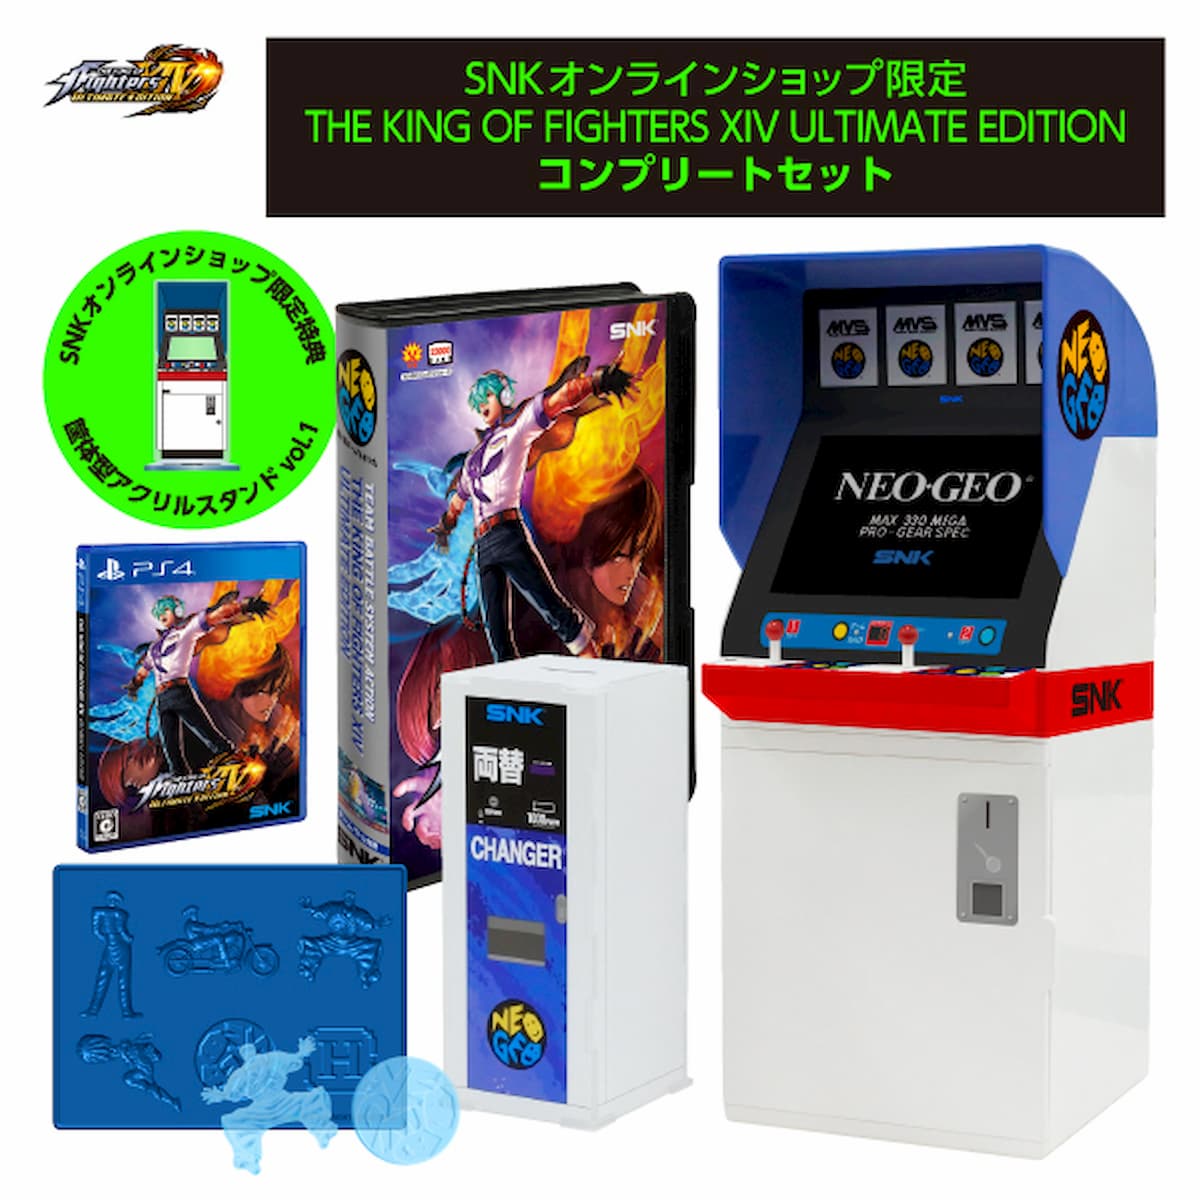 THE KING OF FIGHTERS XIV ULTIMATE EDITION コンプリートセット - PS4